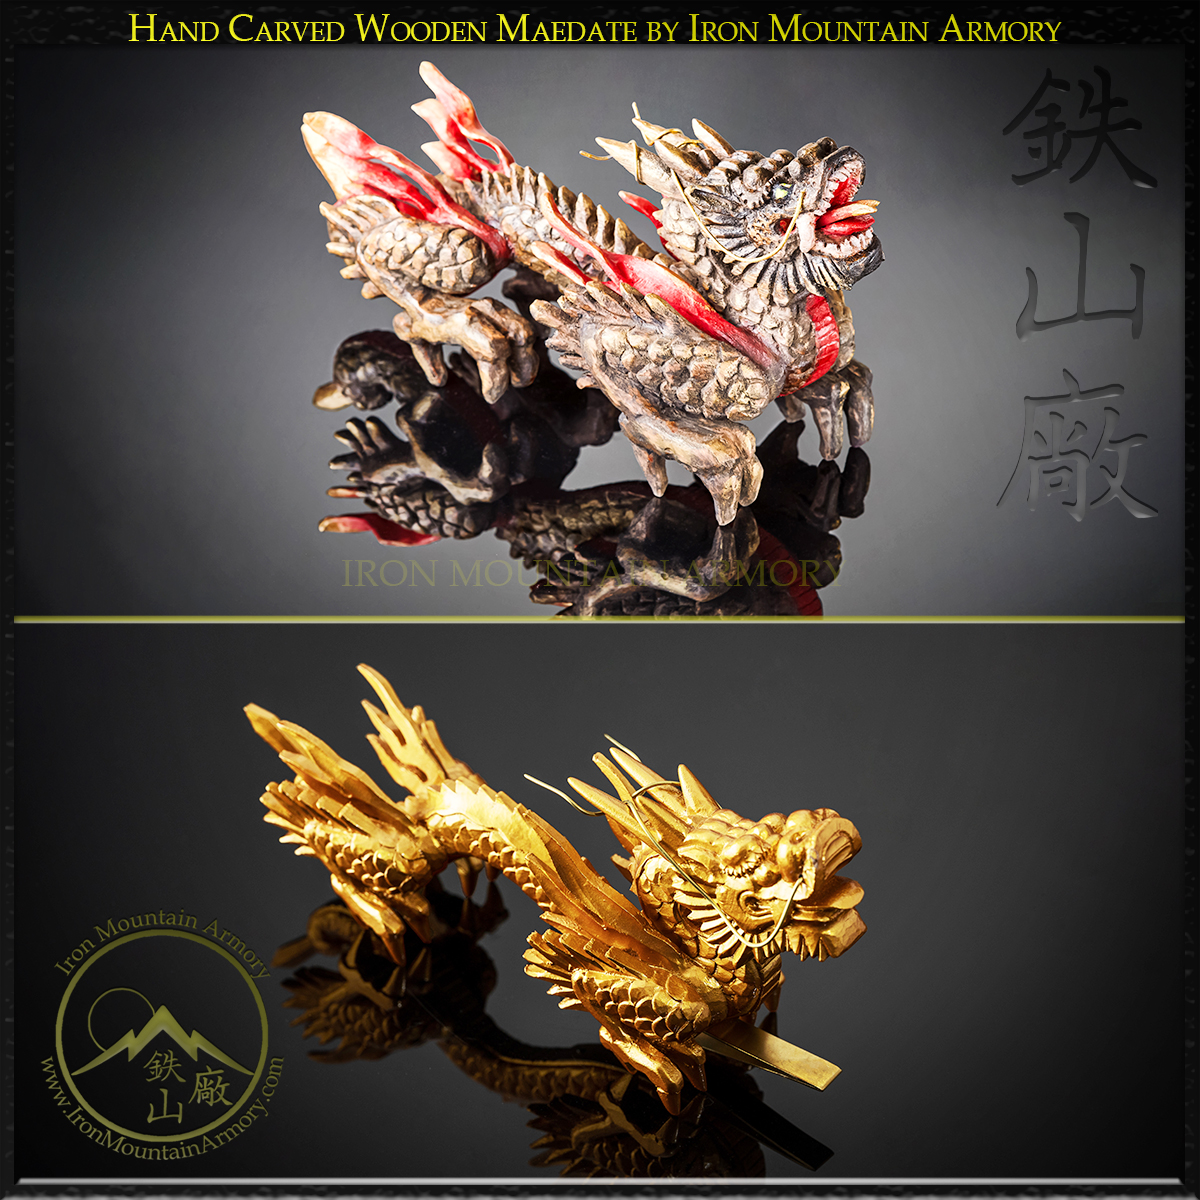 https://shop.samurai-armor.com/wp-content/uploads/2021/09/Comparison-Hand-Carved-Wooden-Maedate-Dragon-by-Iron-Mountain-Armory.jpg